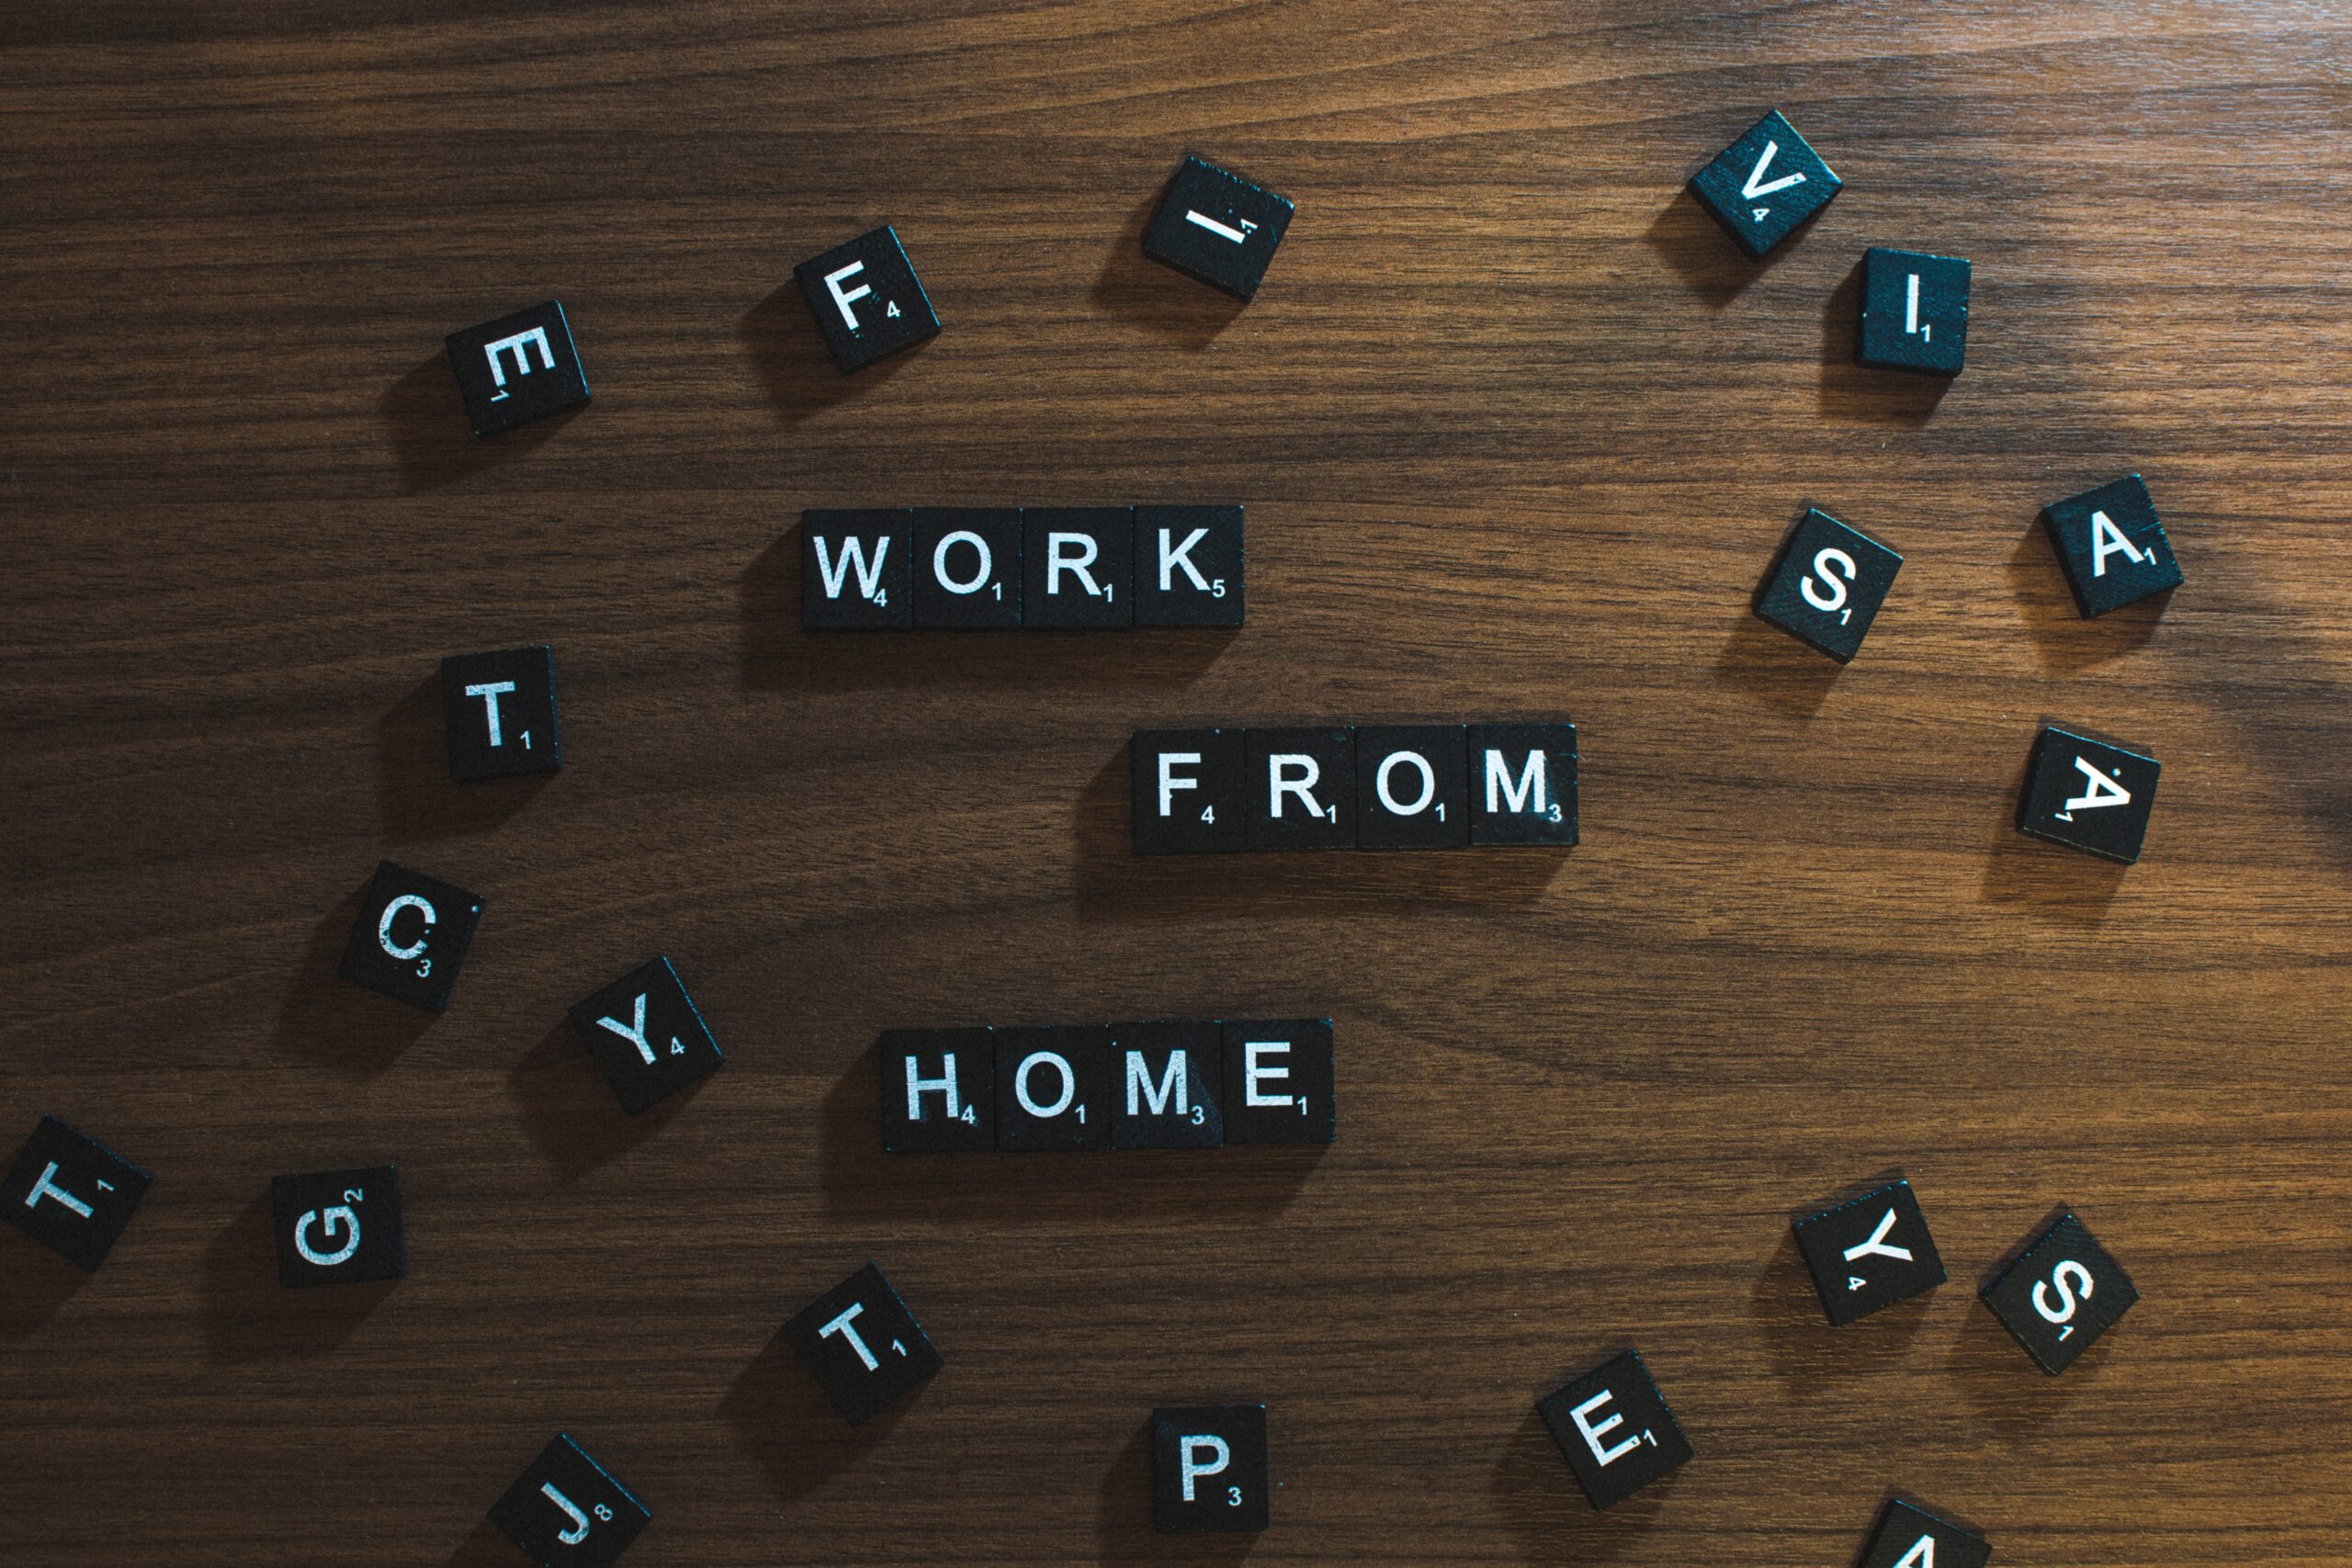 Work from Home Tiles